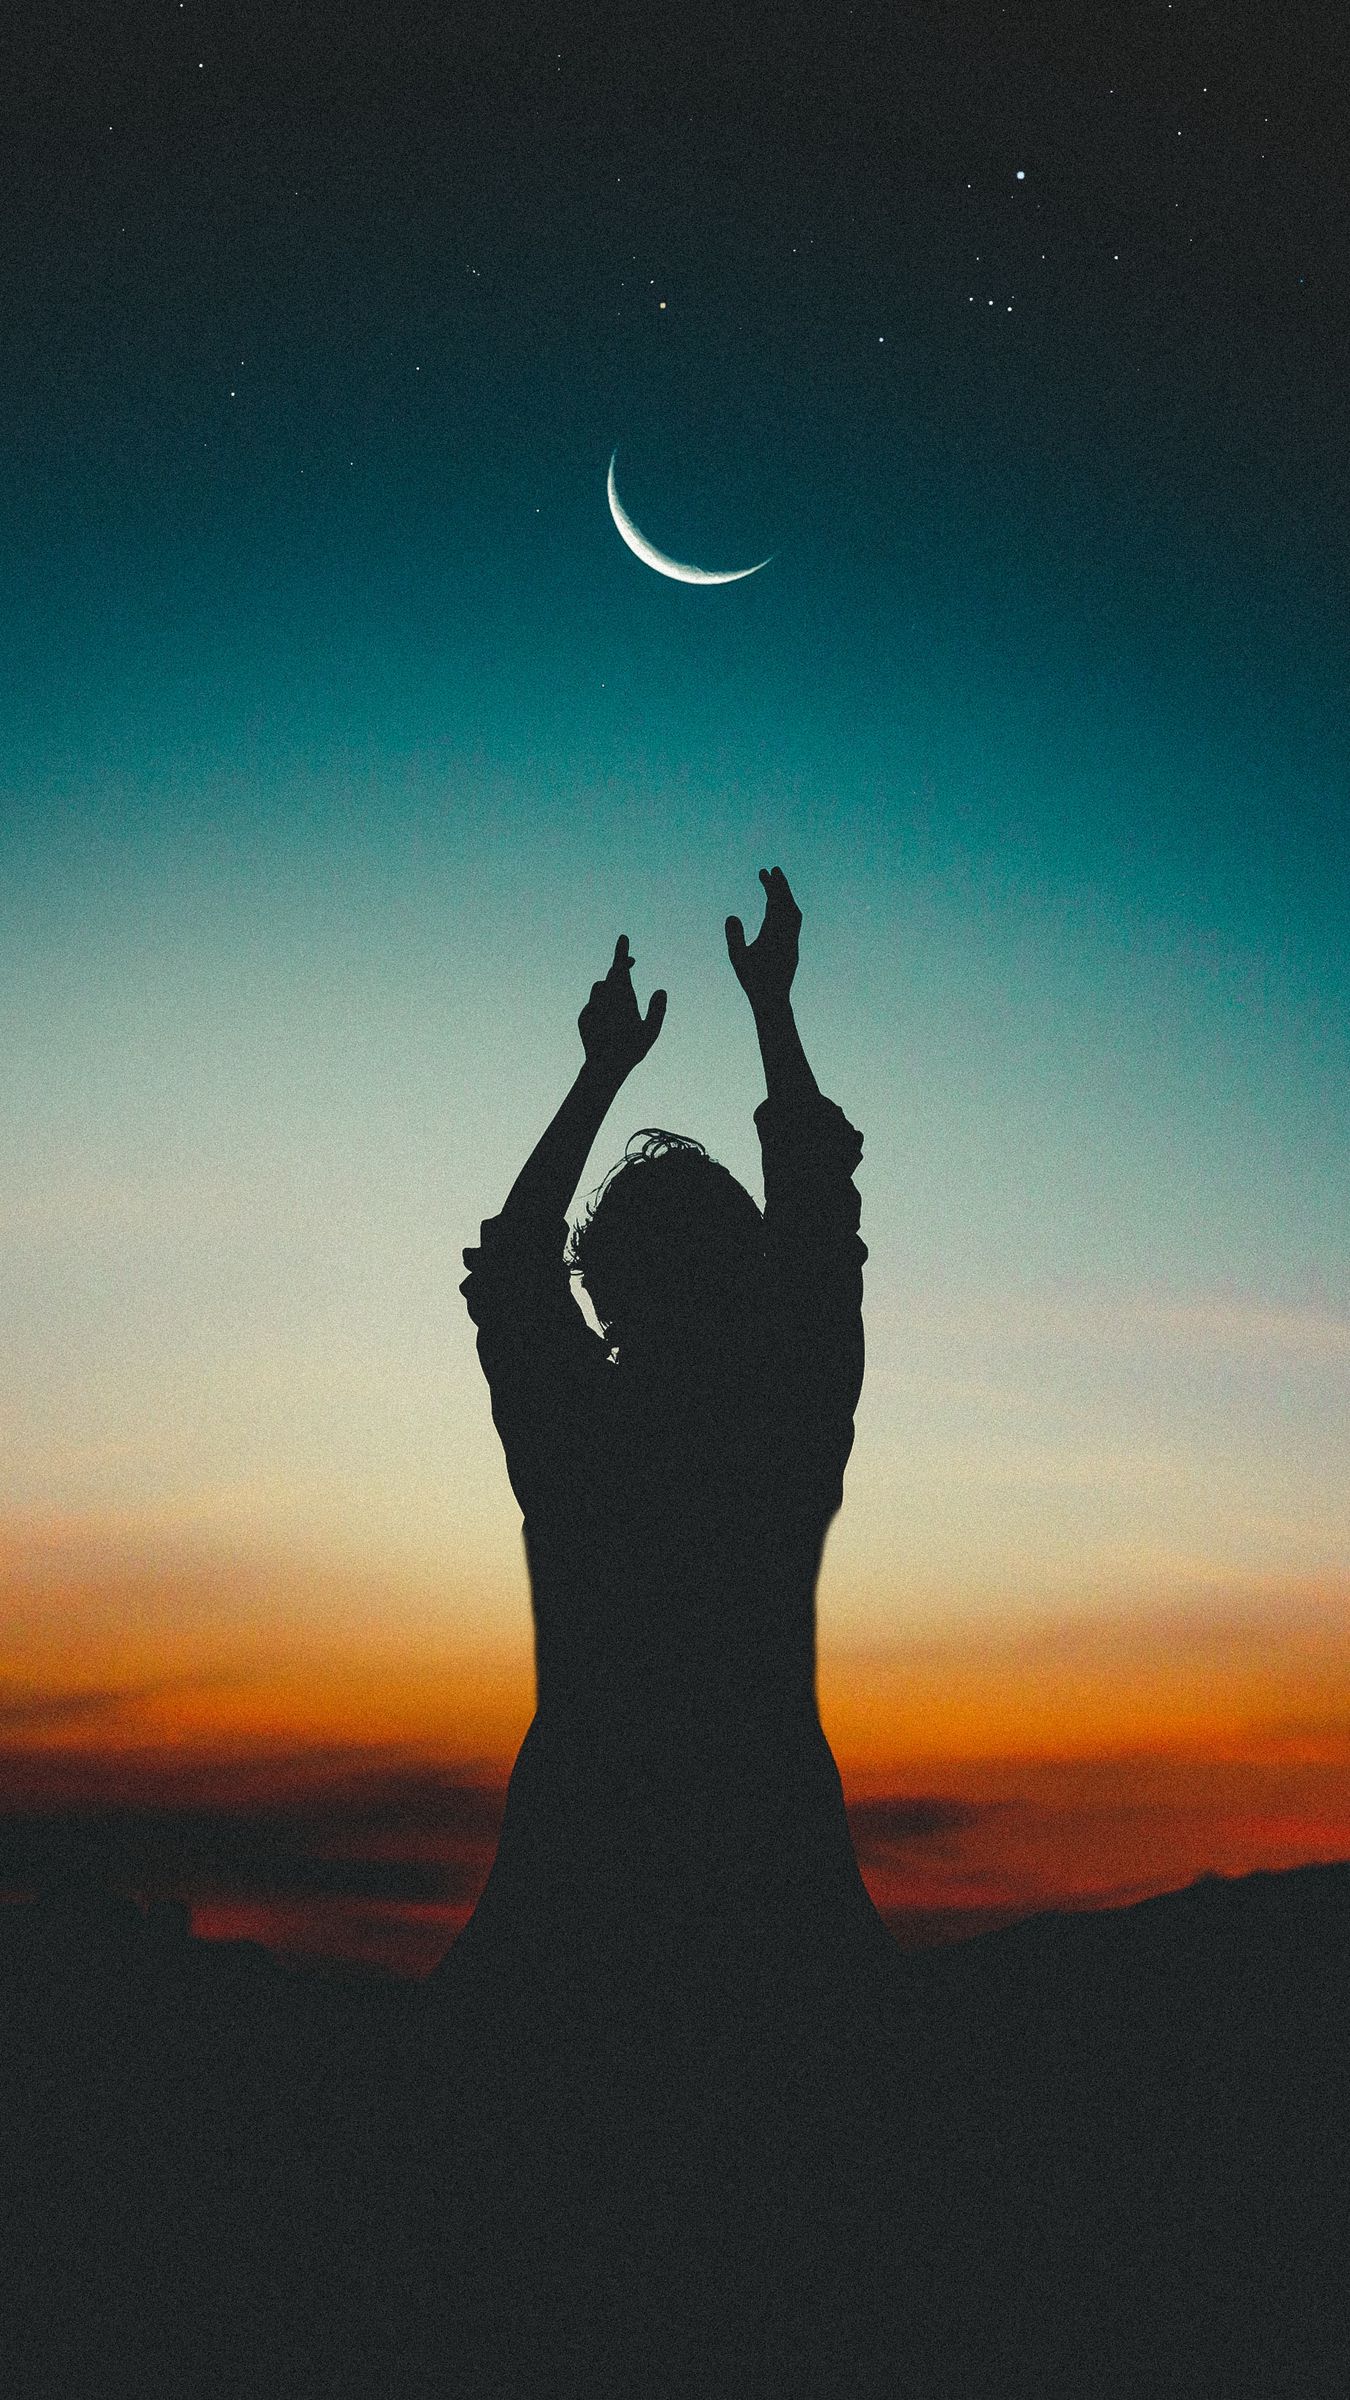 Download wallpaper 1350x2400 silhouette, man, night, moon, sky iphone  8+/7+/6s+/6+ for parallax hd background